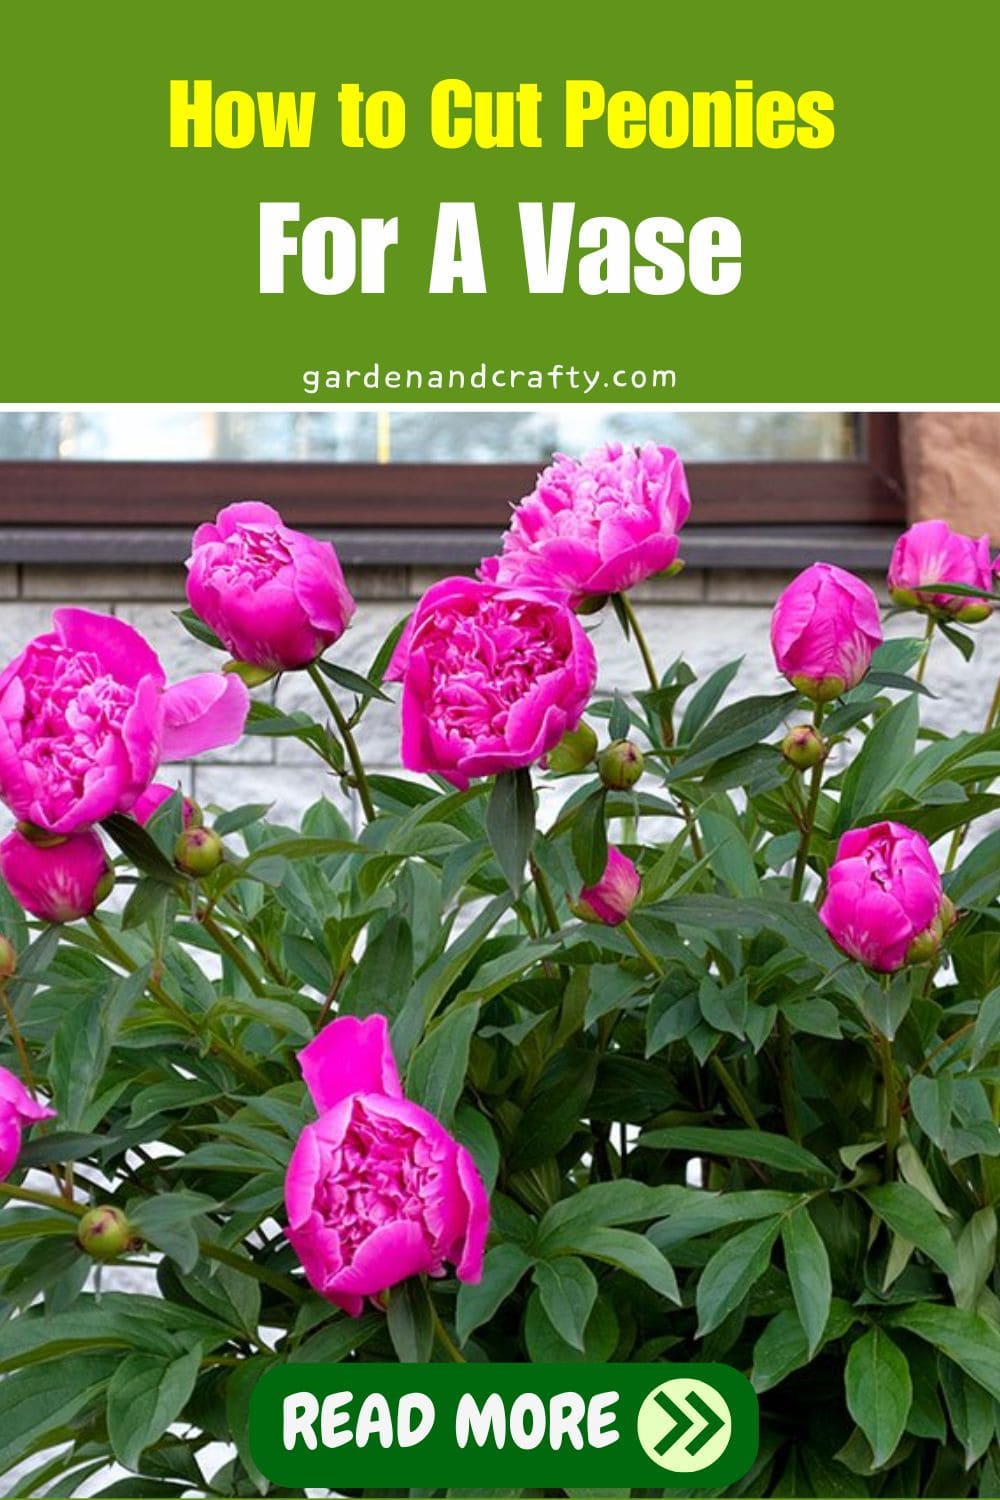 How to Cut Peonies For A Vase